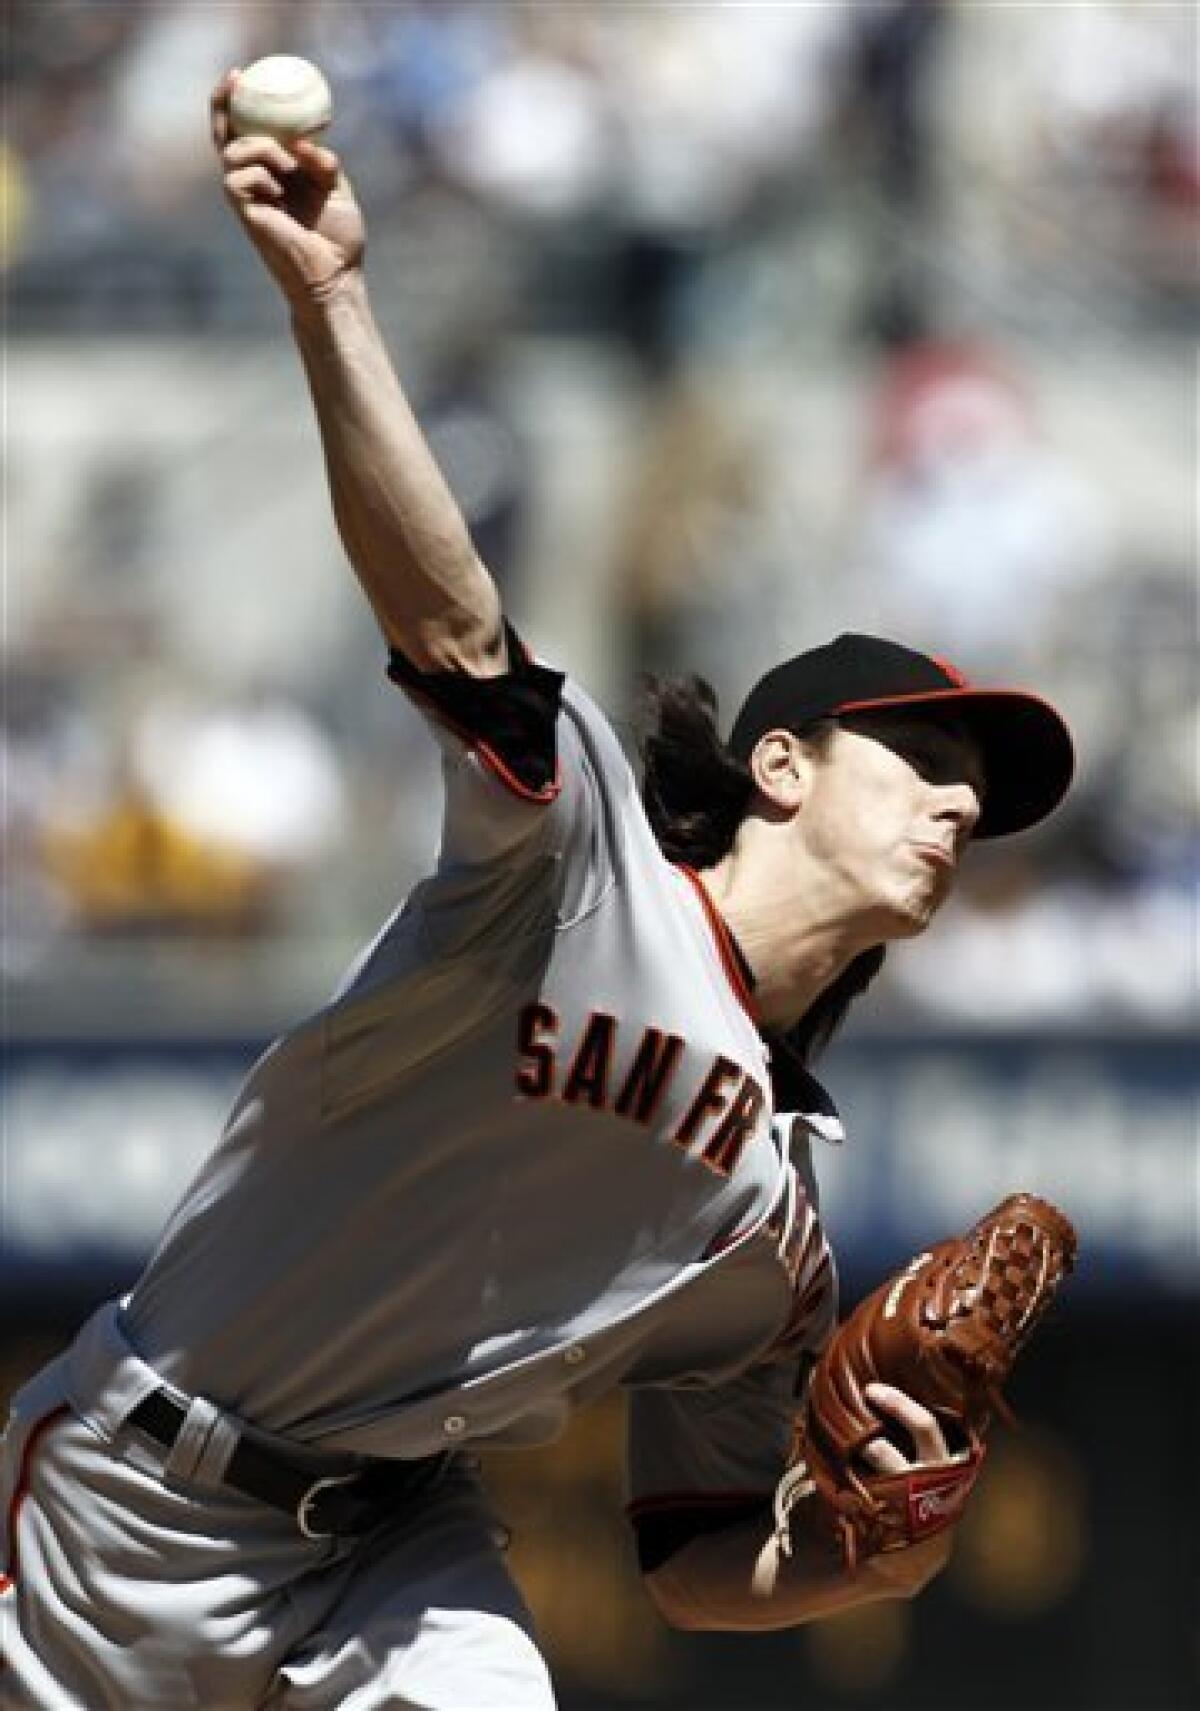 Lincecum shuts down Padres, NL West tied again - The San Diego